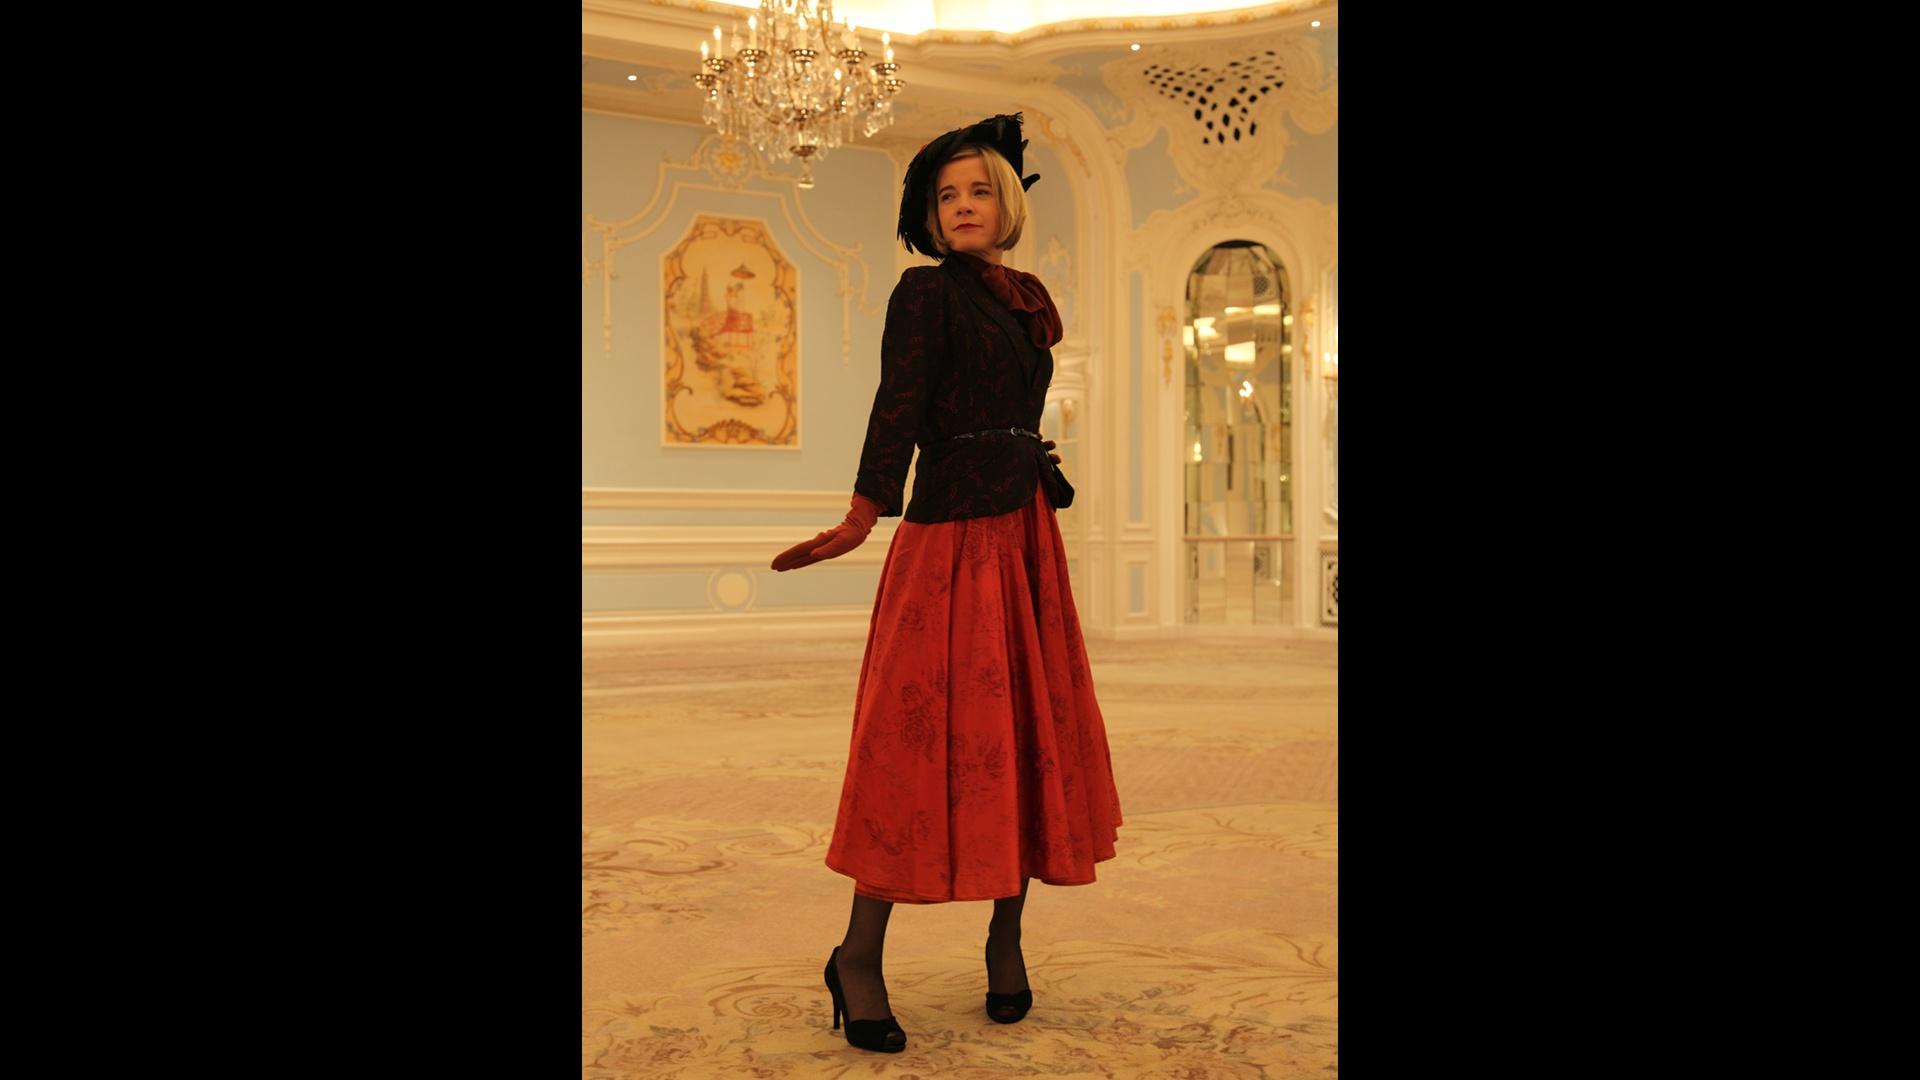 Lucy wearing a Dior-style costume at the Savoy.